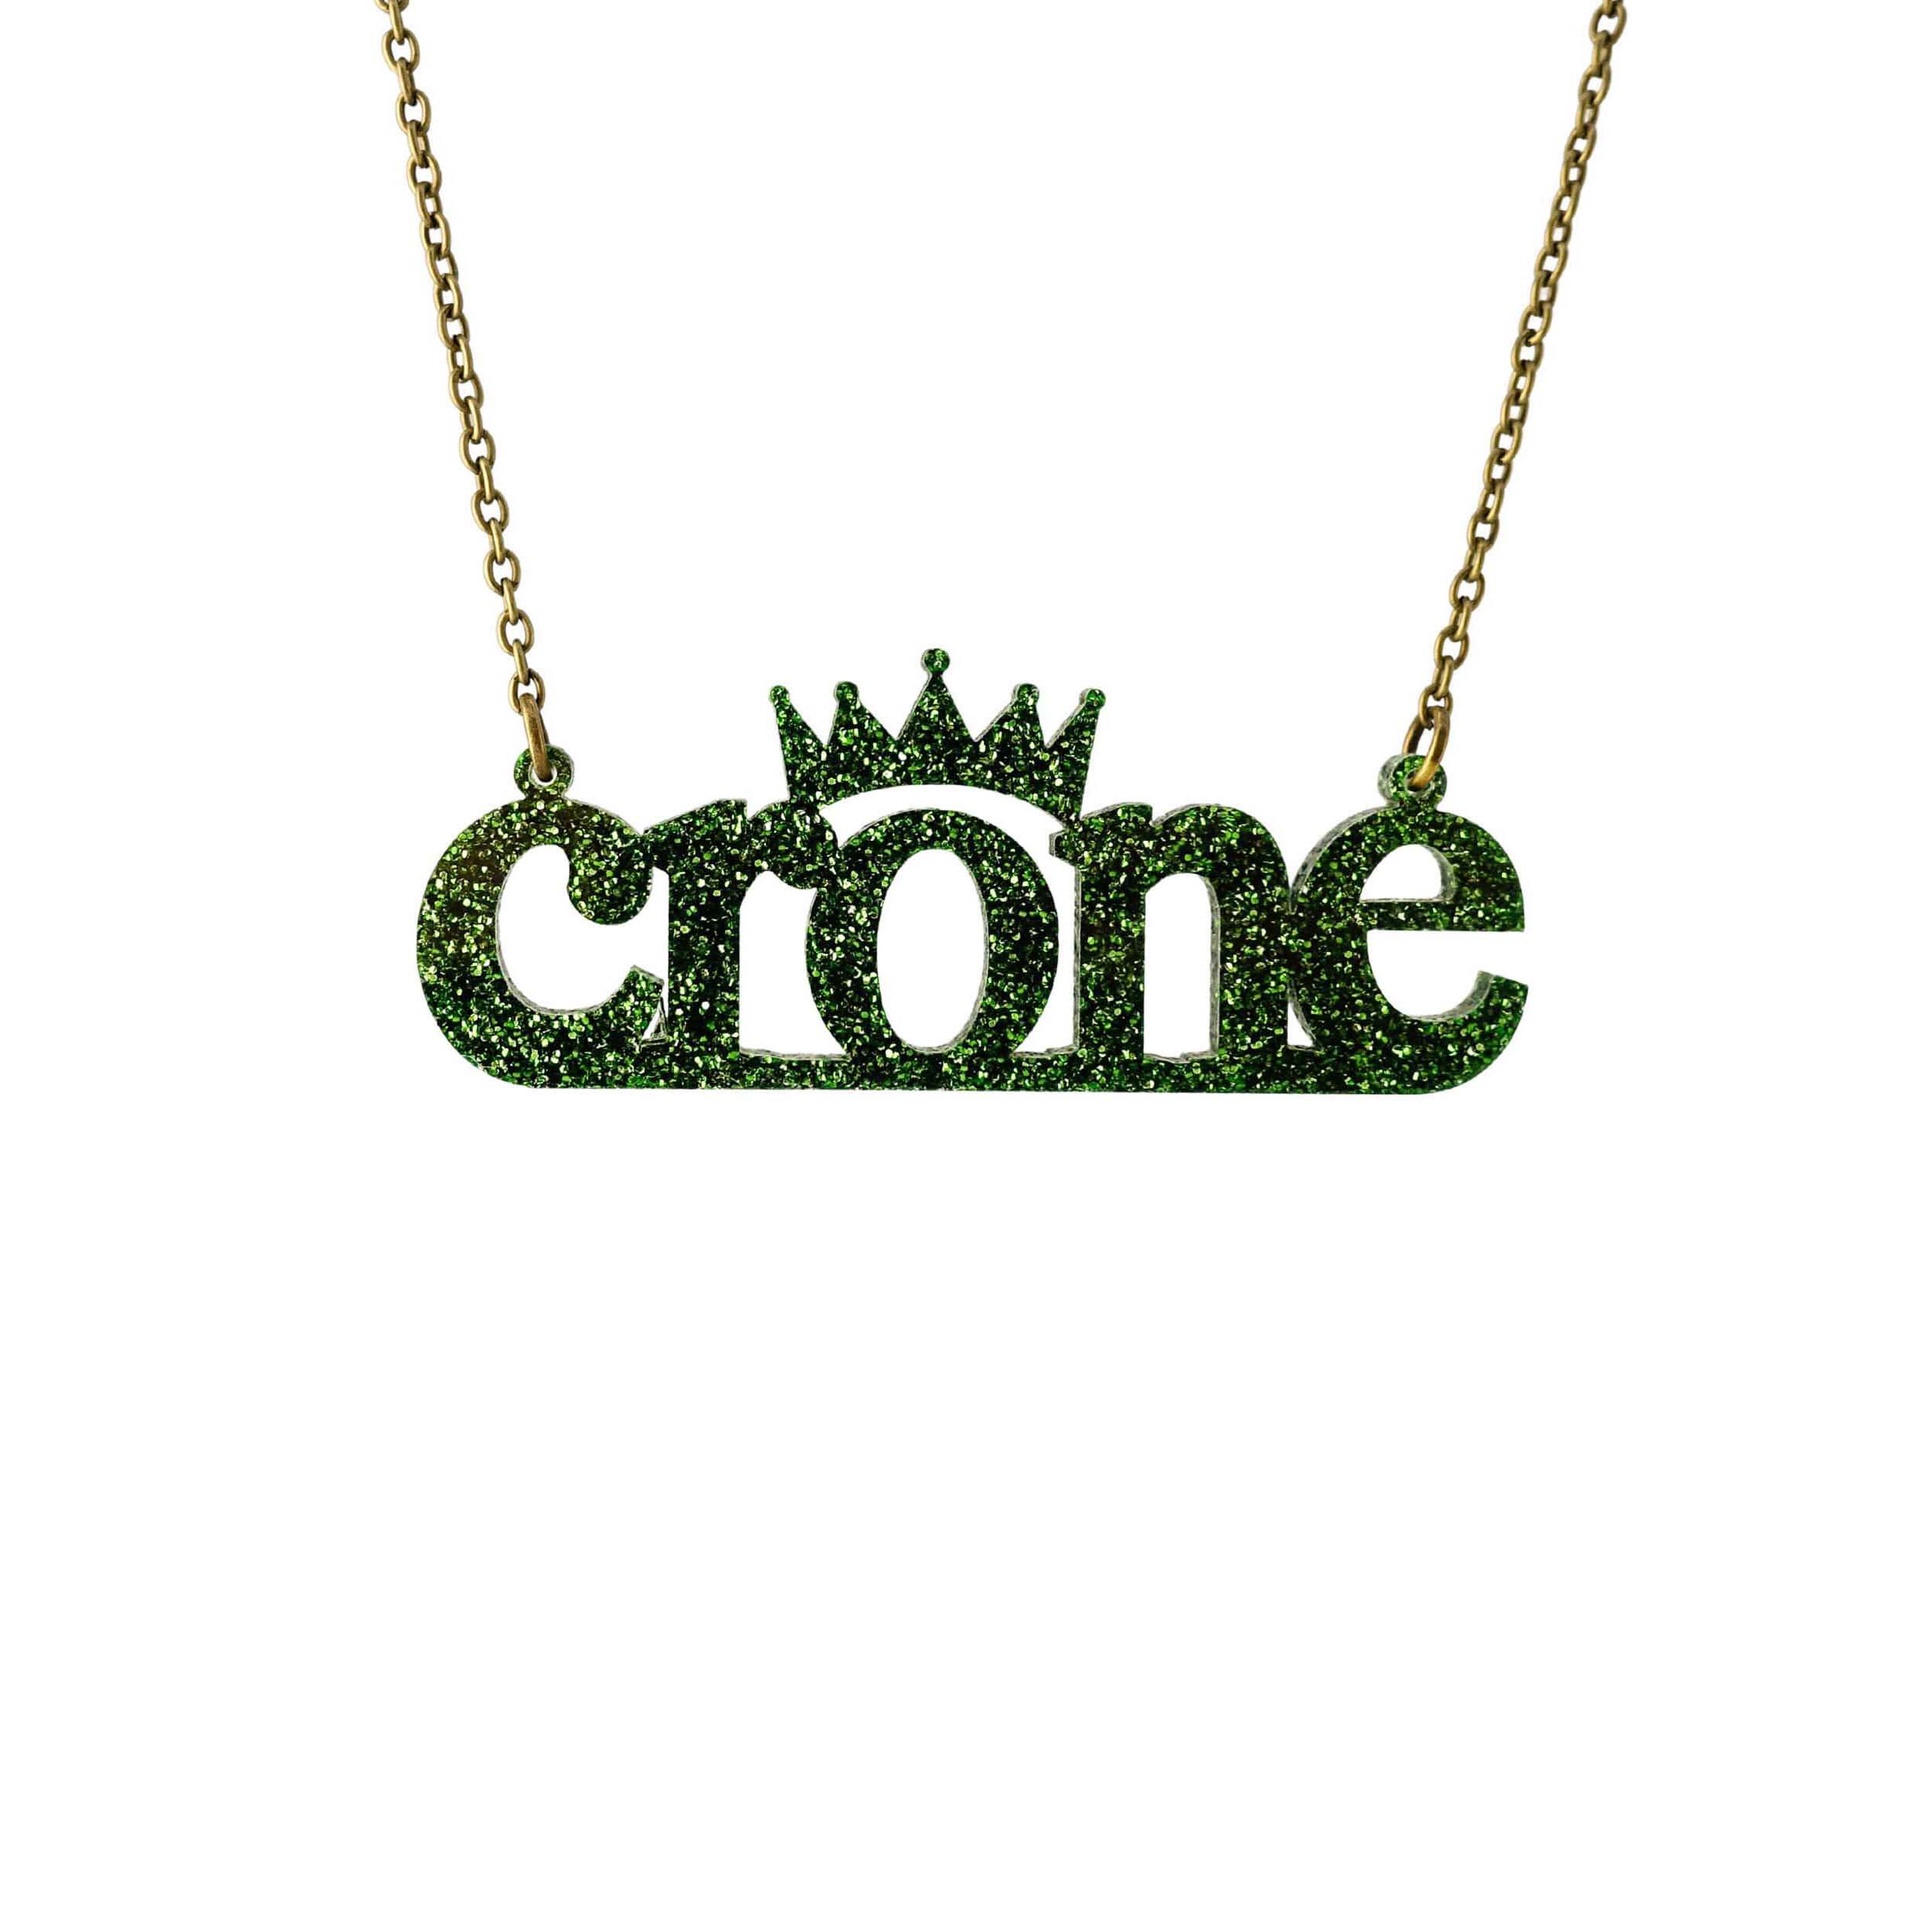 Crone necklace in moss glitter, shown hanging against a white background. 